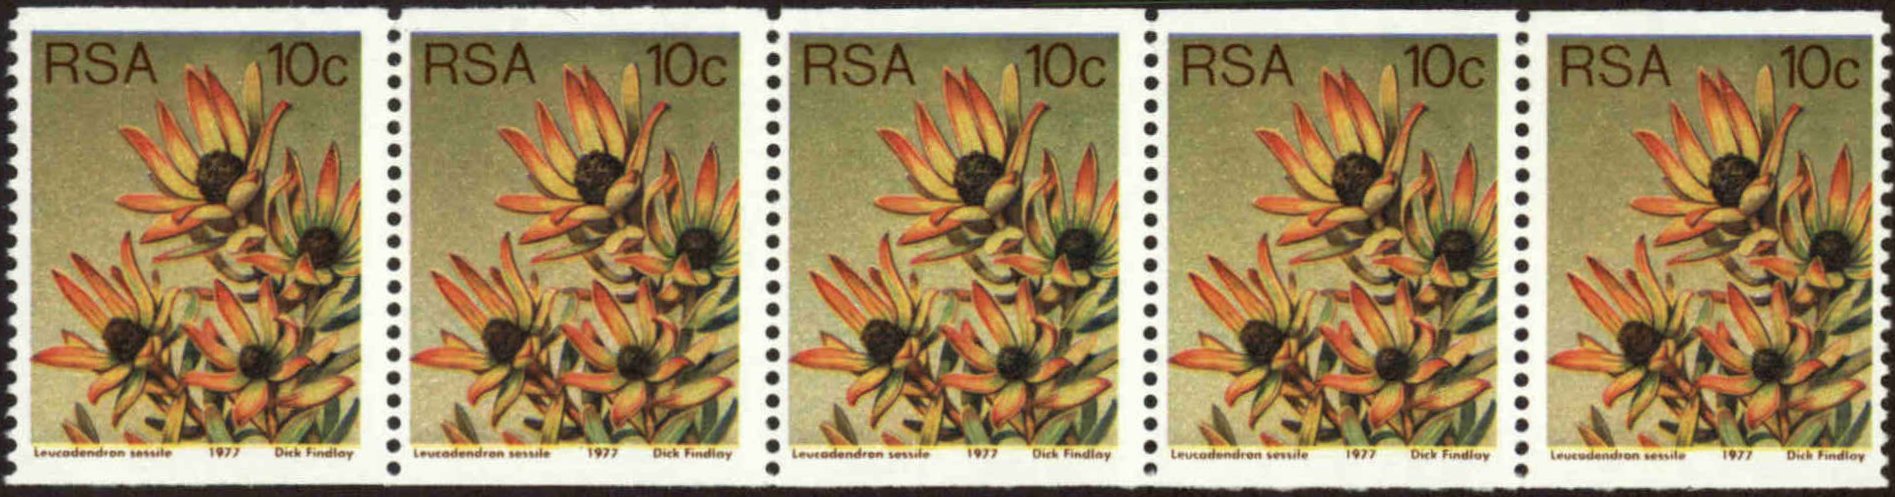 Front view of South Africa 495 collectors stamp